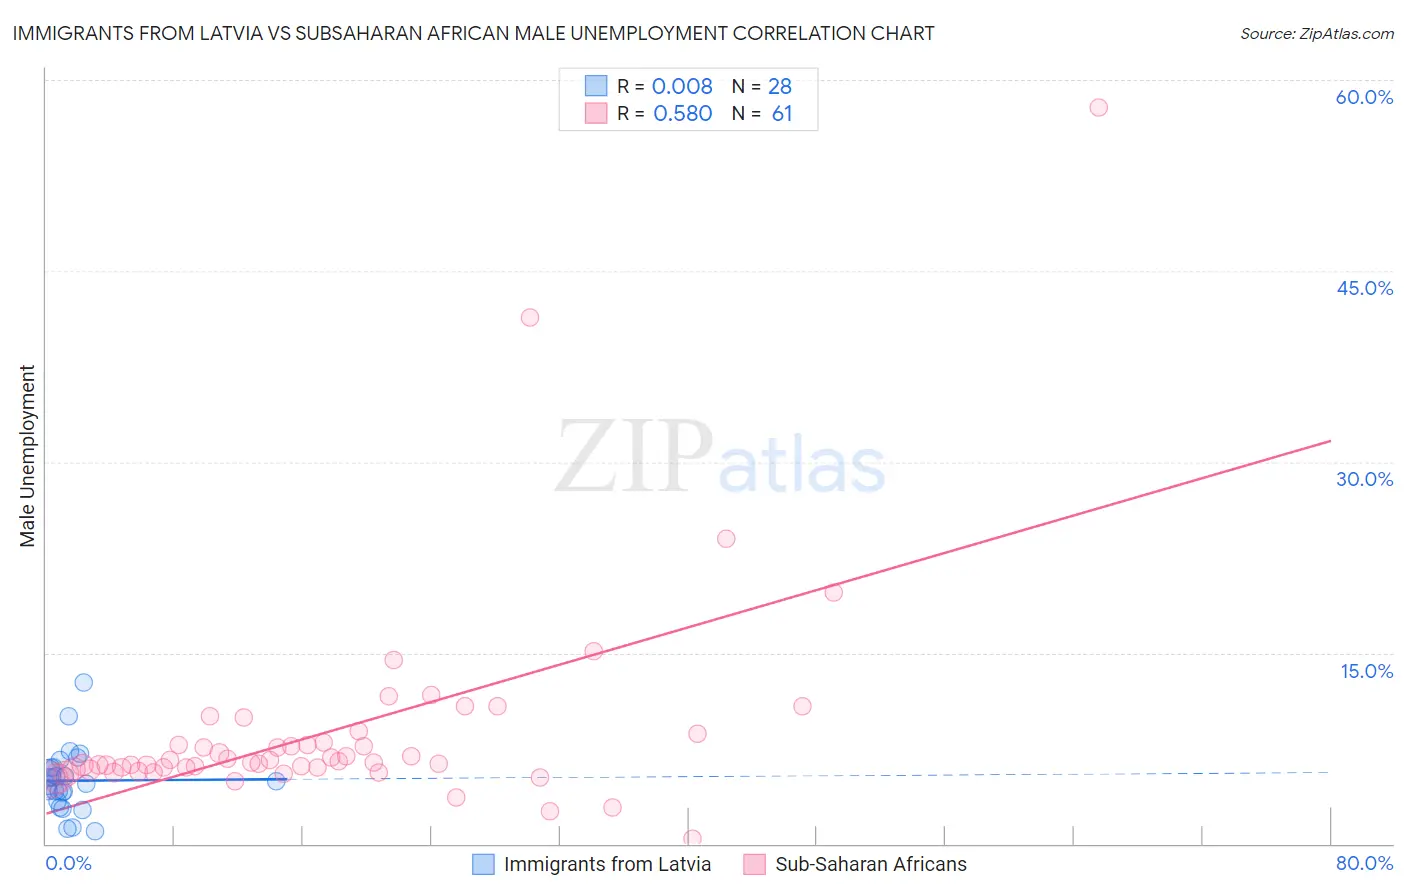 Immigrants from Latvia vs Subsaharan African Male Unemployment